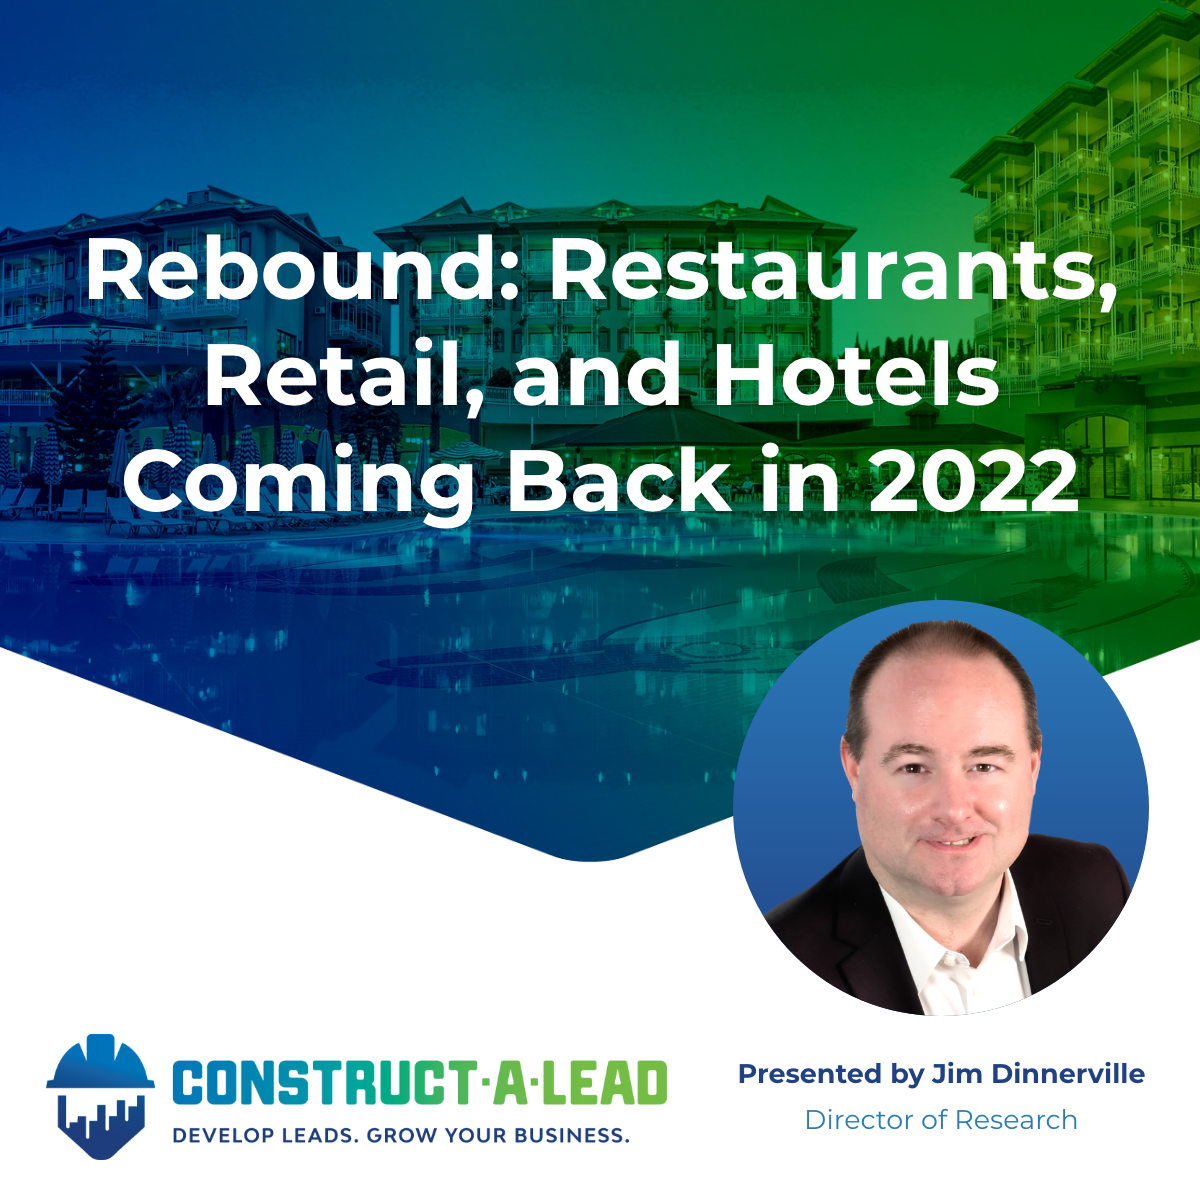 Rebound: Restaurants, Retail, and Hotels Coming Back in 2022